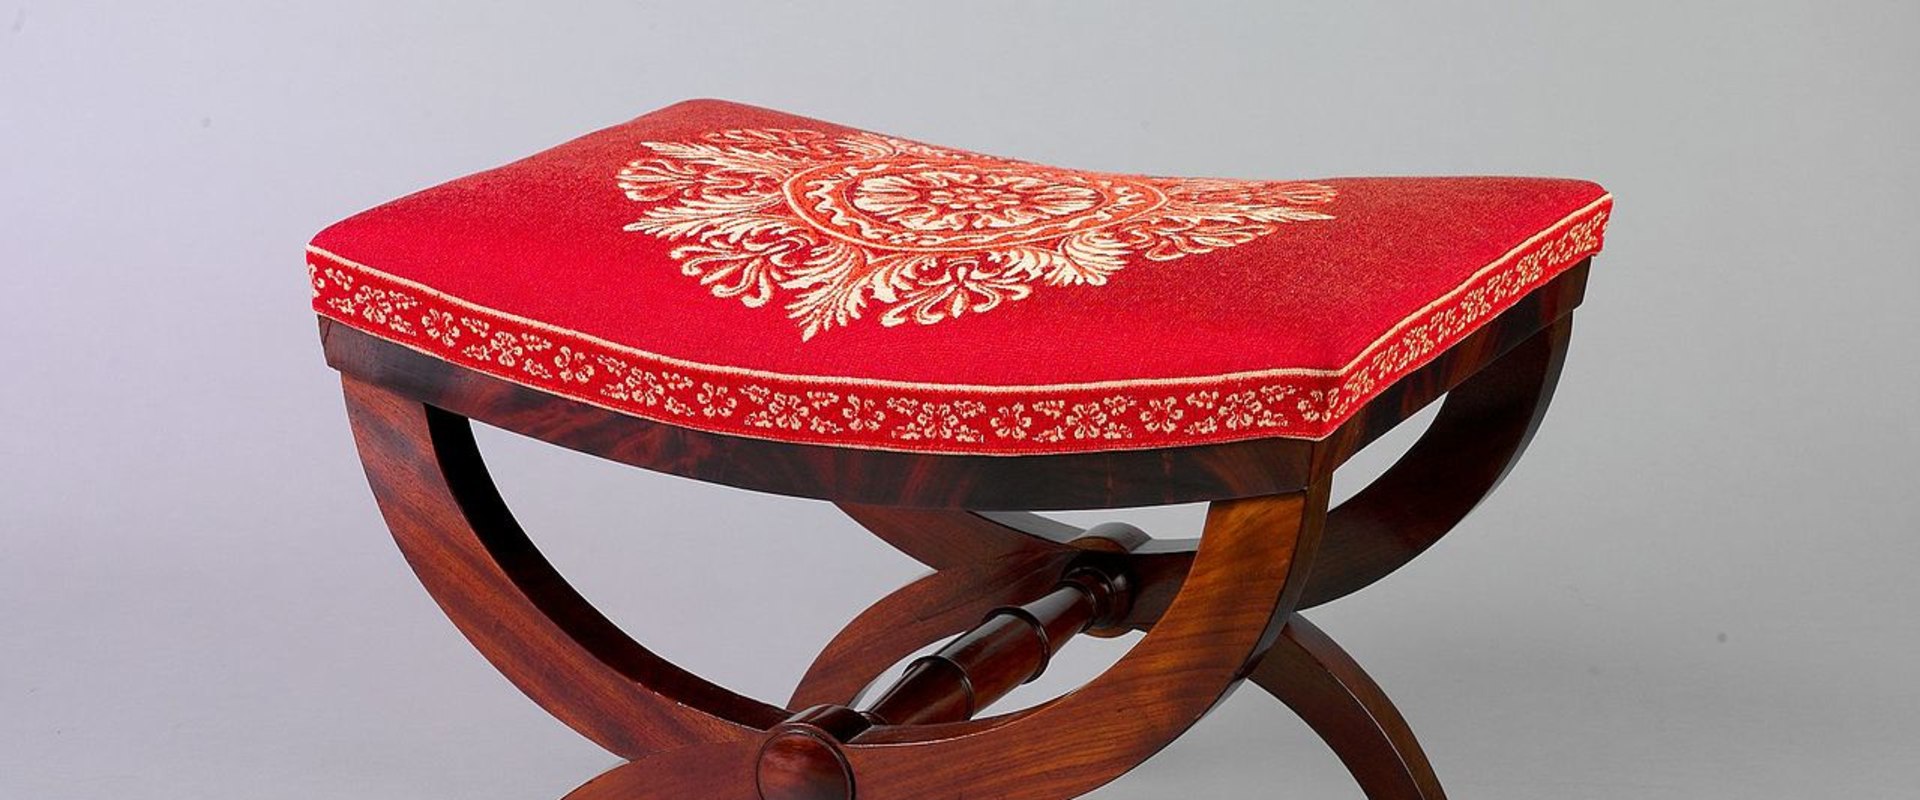 The History of Chairs: From Ancient Egypt to Modern Times